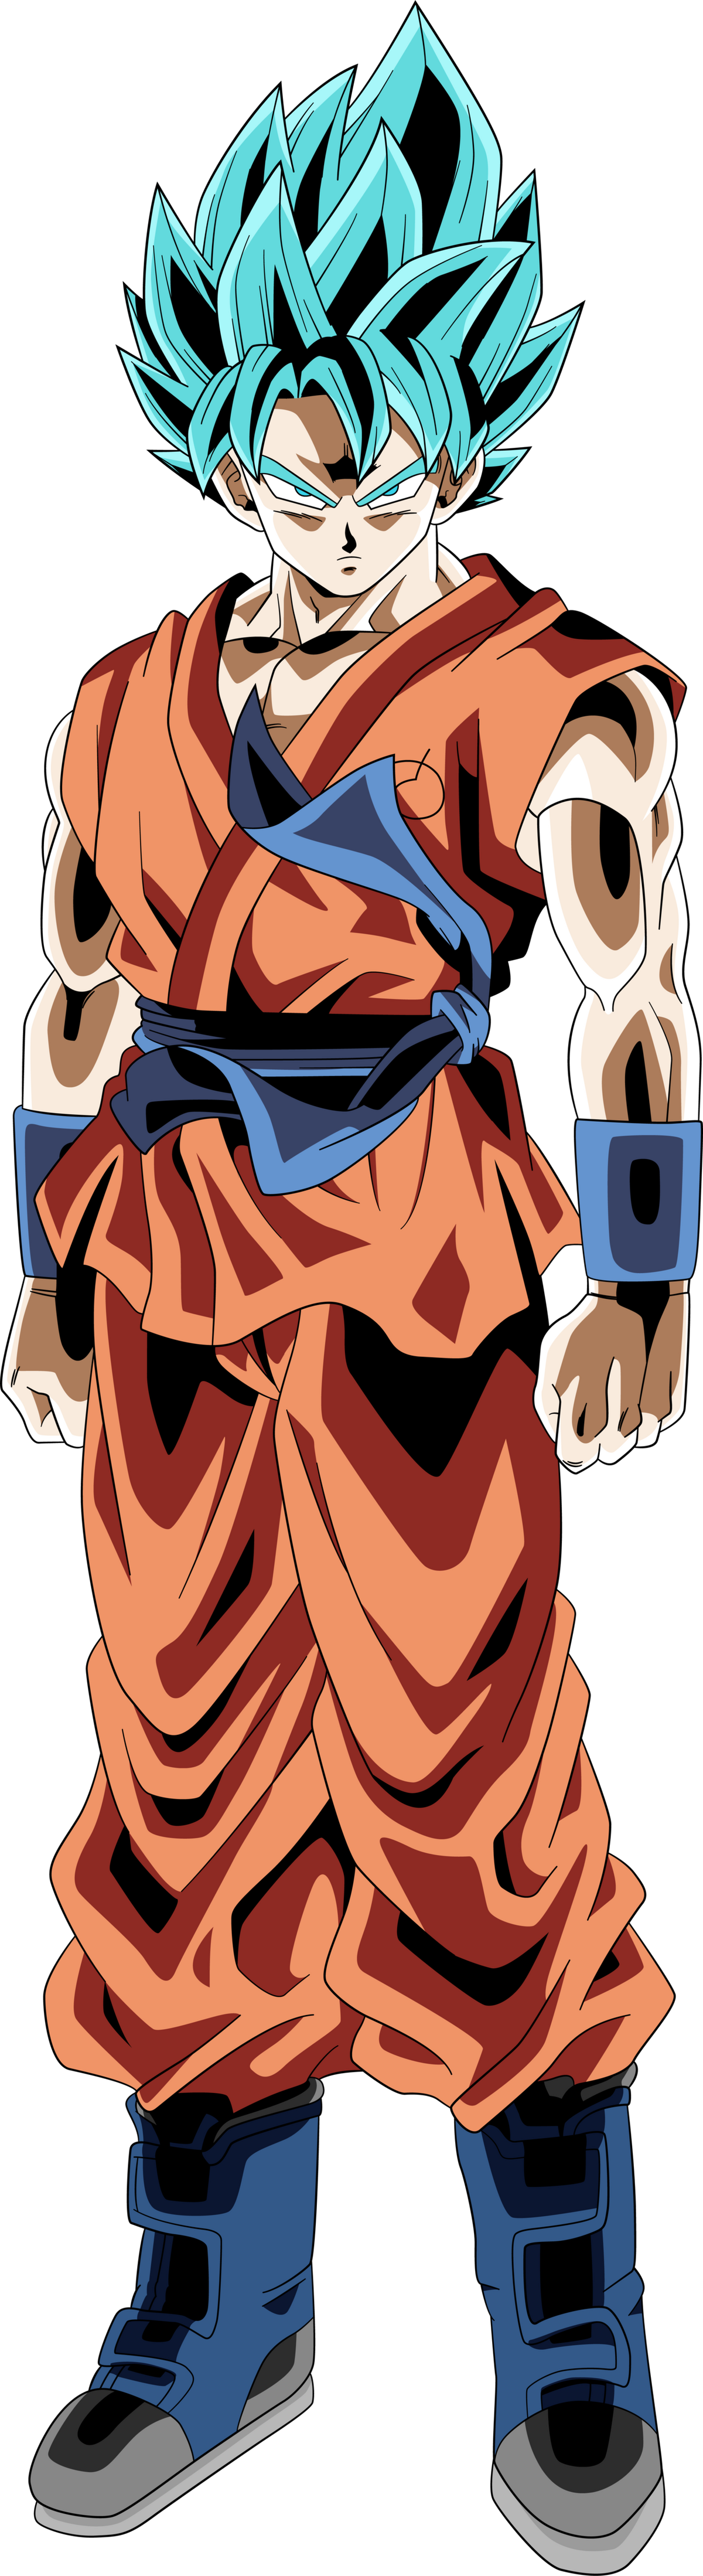 Its just Drip Goku. There's nothing different! Walt a minute